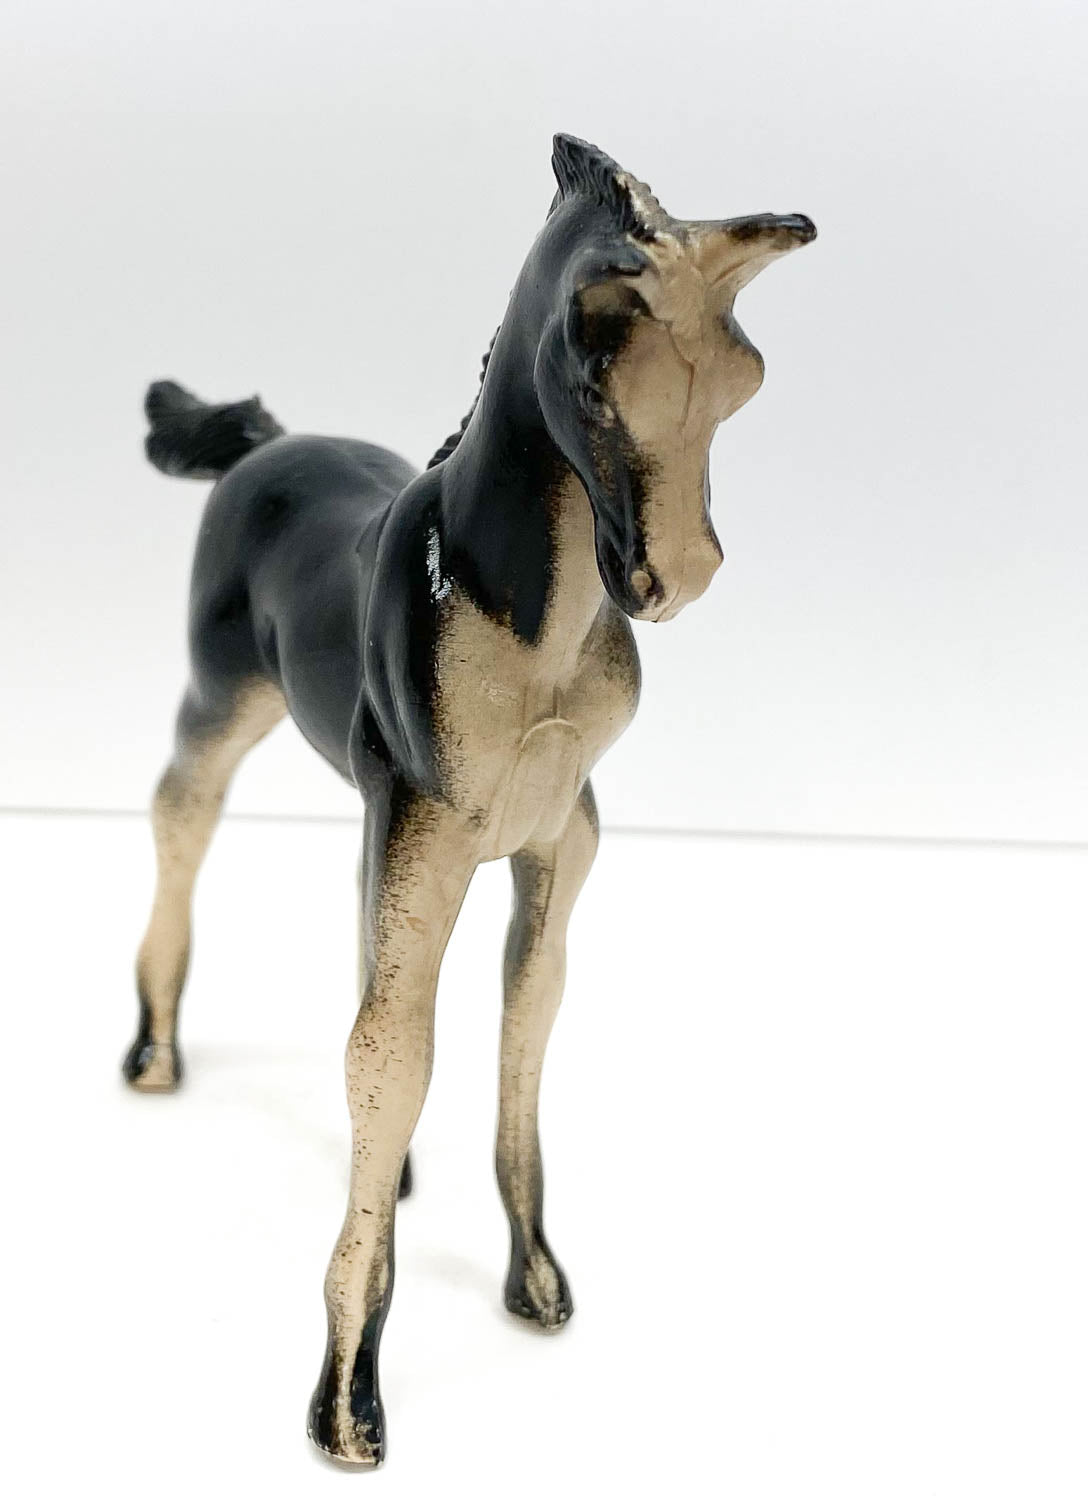 Imperial Toy Co - Classic Arabian Foal Knockoff, Black